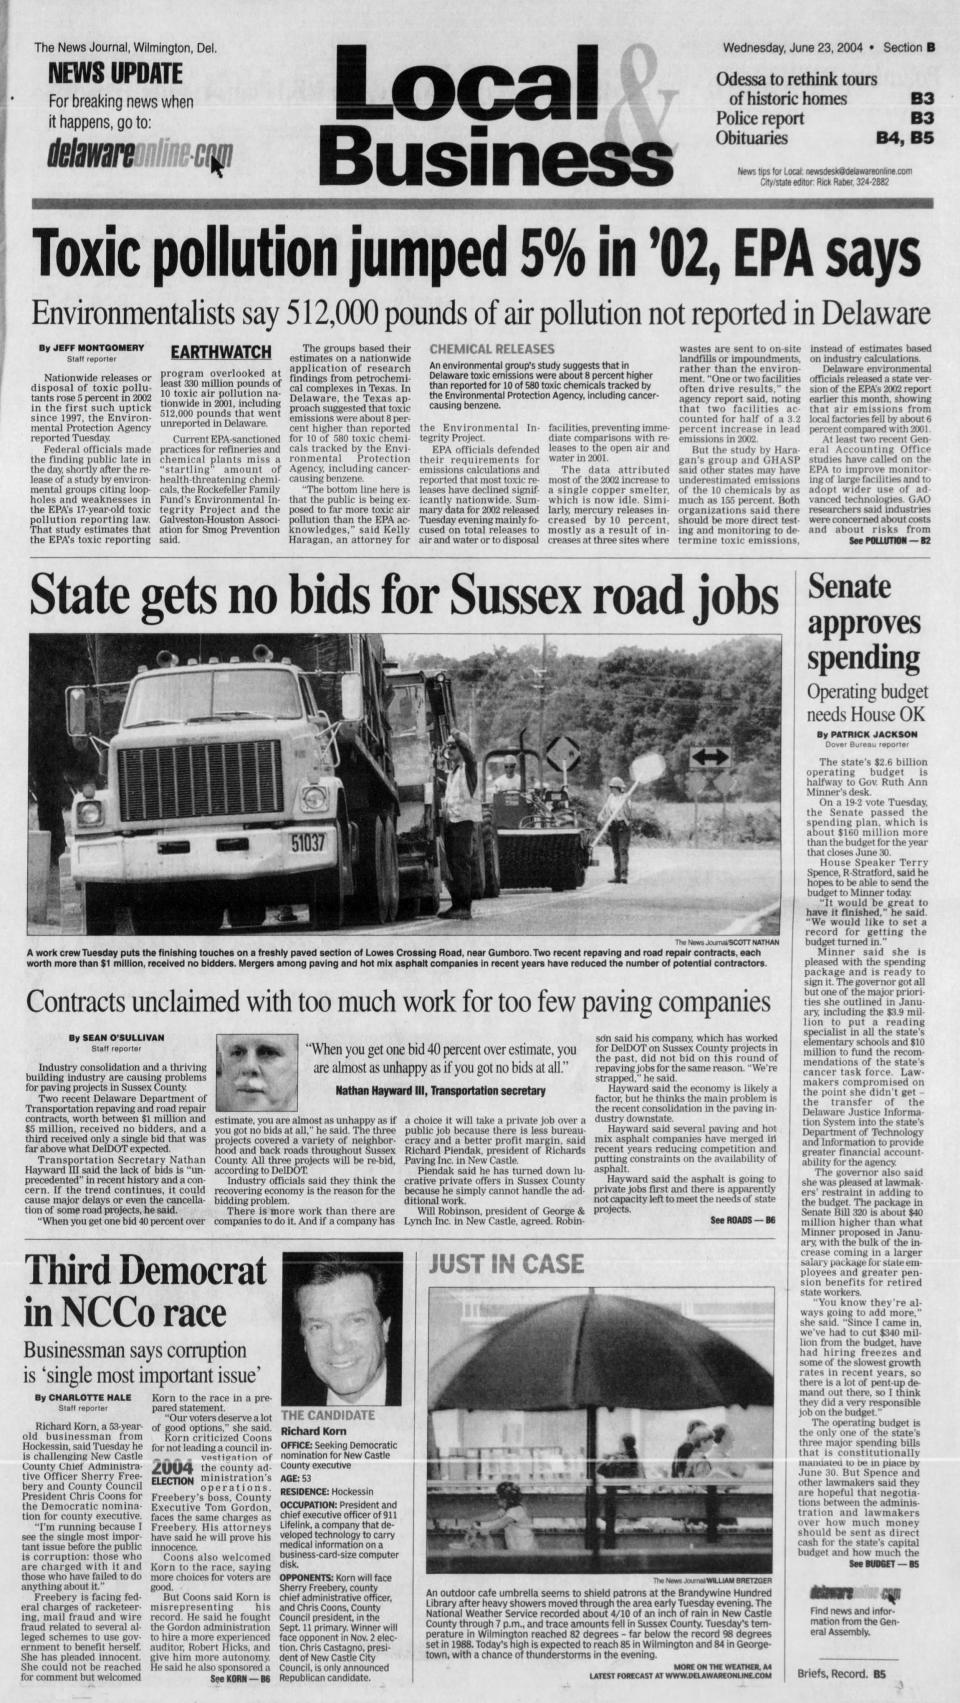 Page B1 of The News Journal from June 23, 2004.